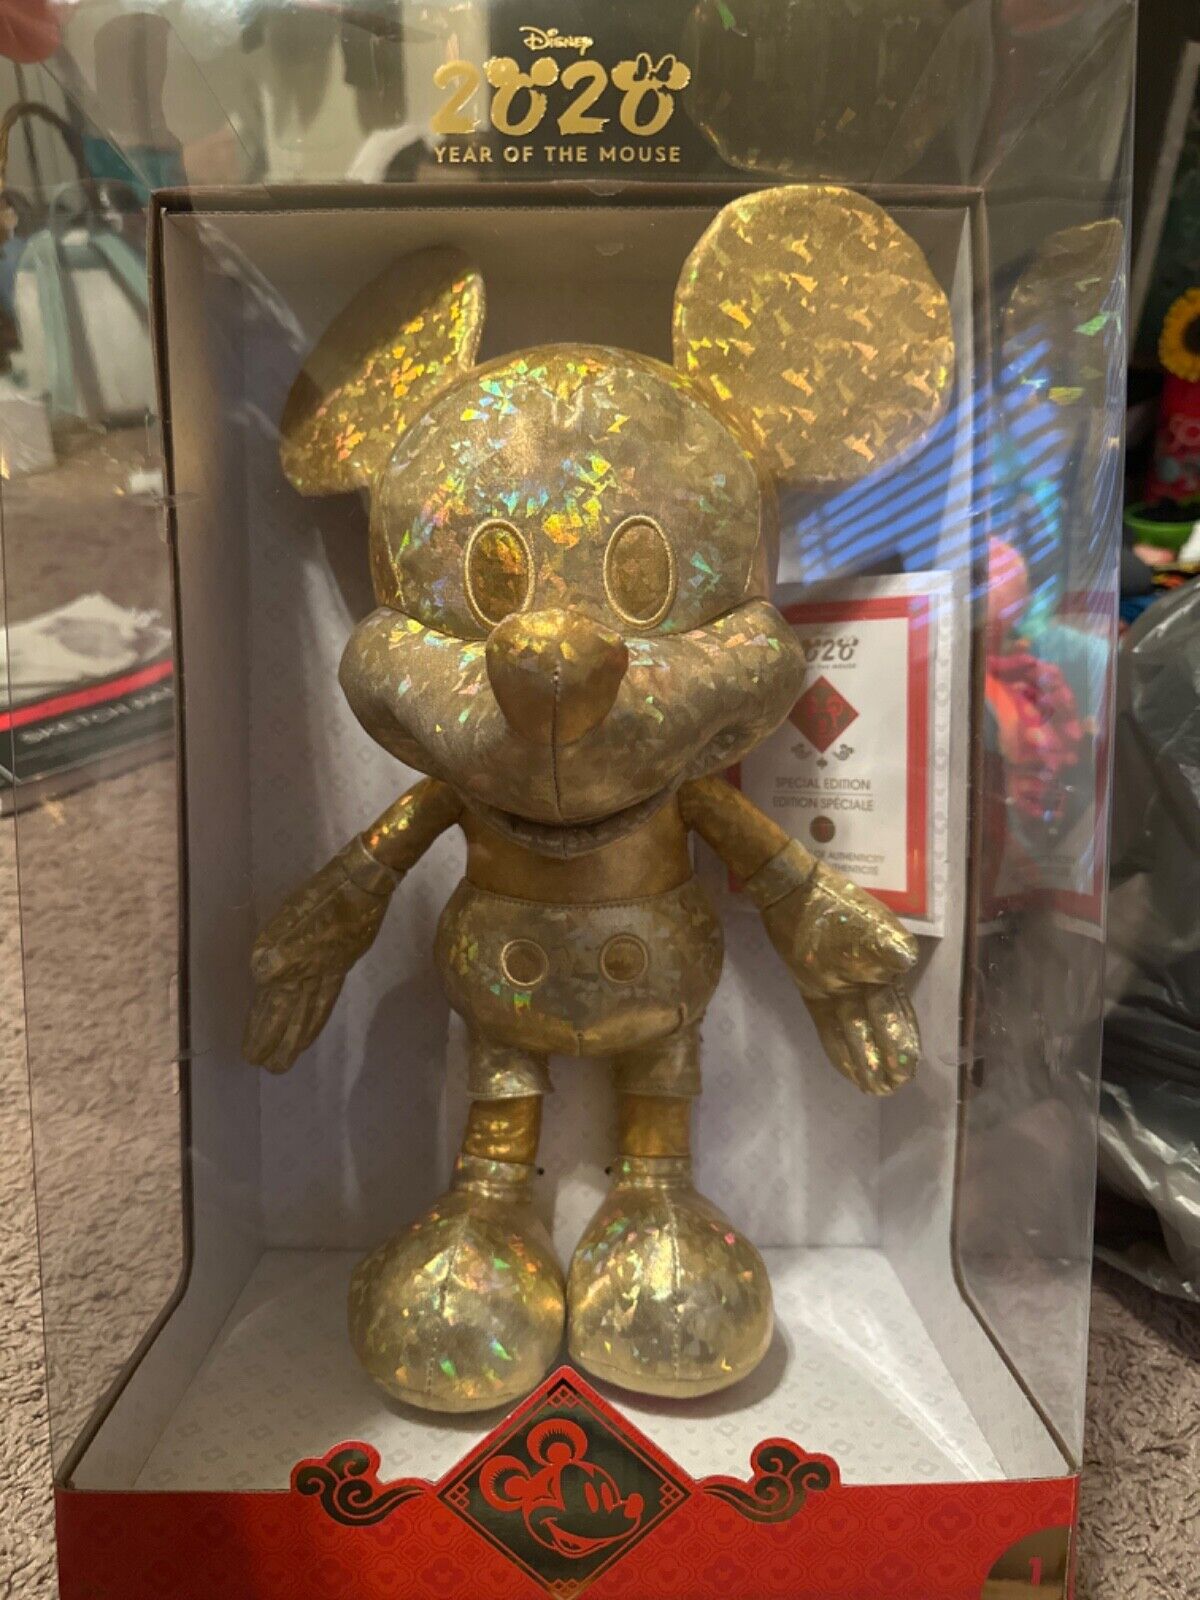 Golden Mickey Mouse, 2020 Lunar New Year, Disney New condition never opened